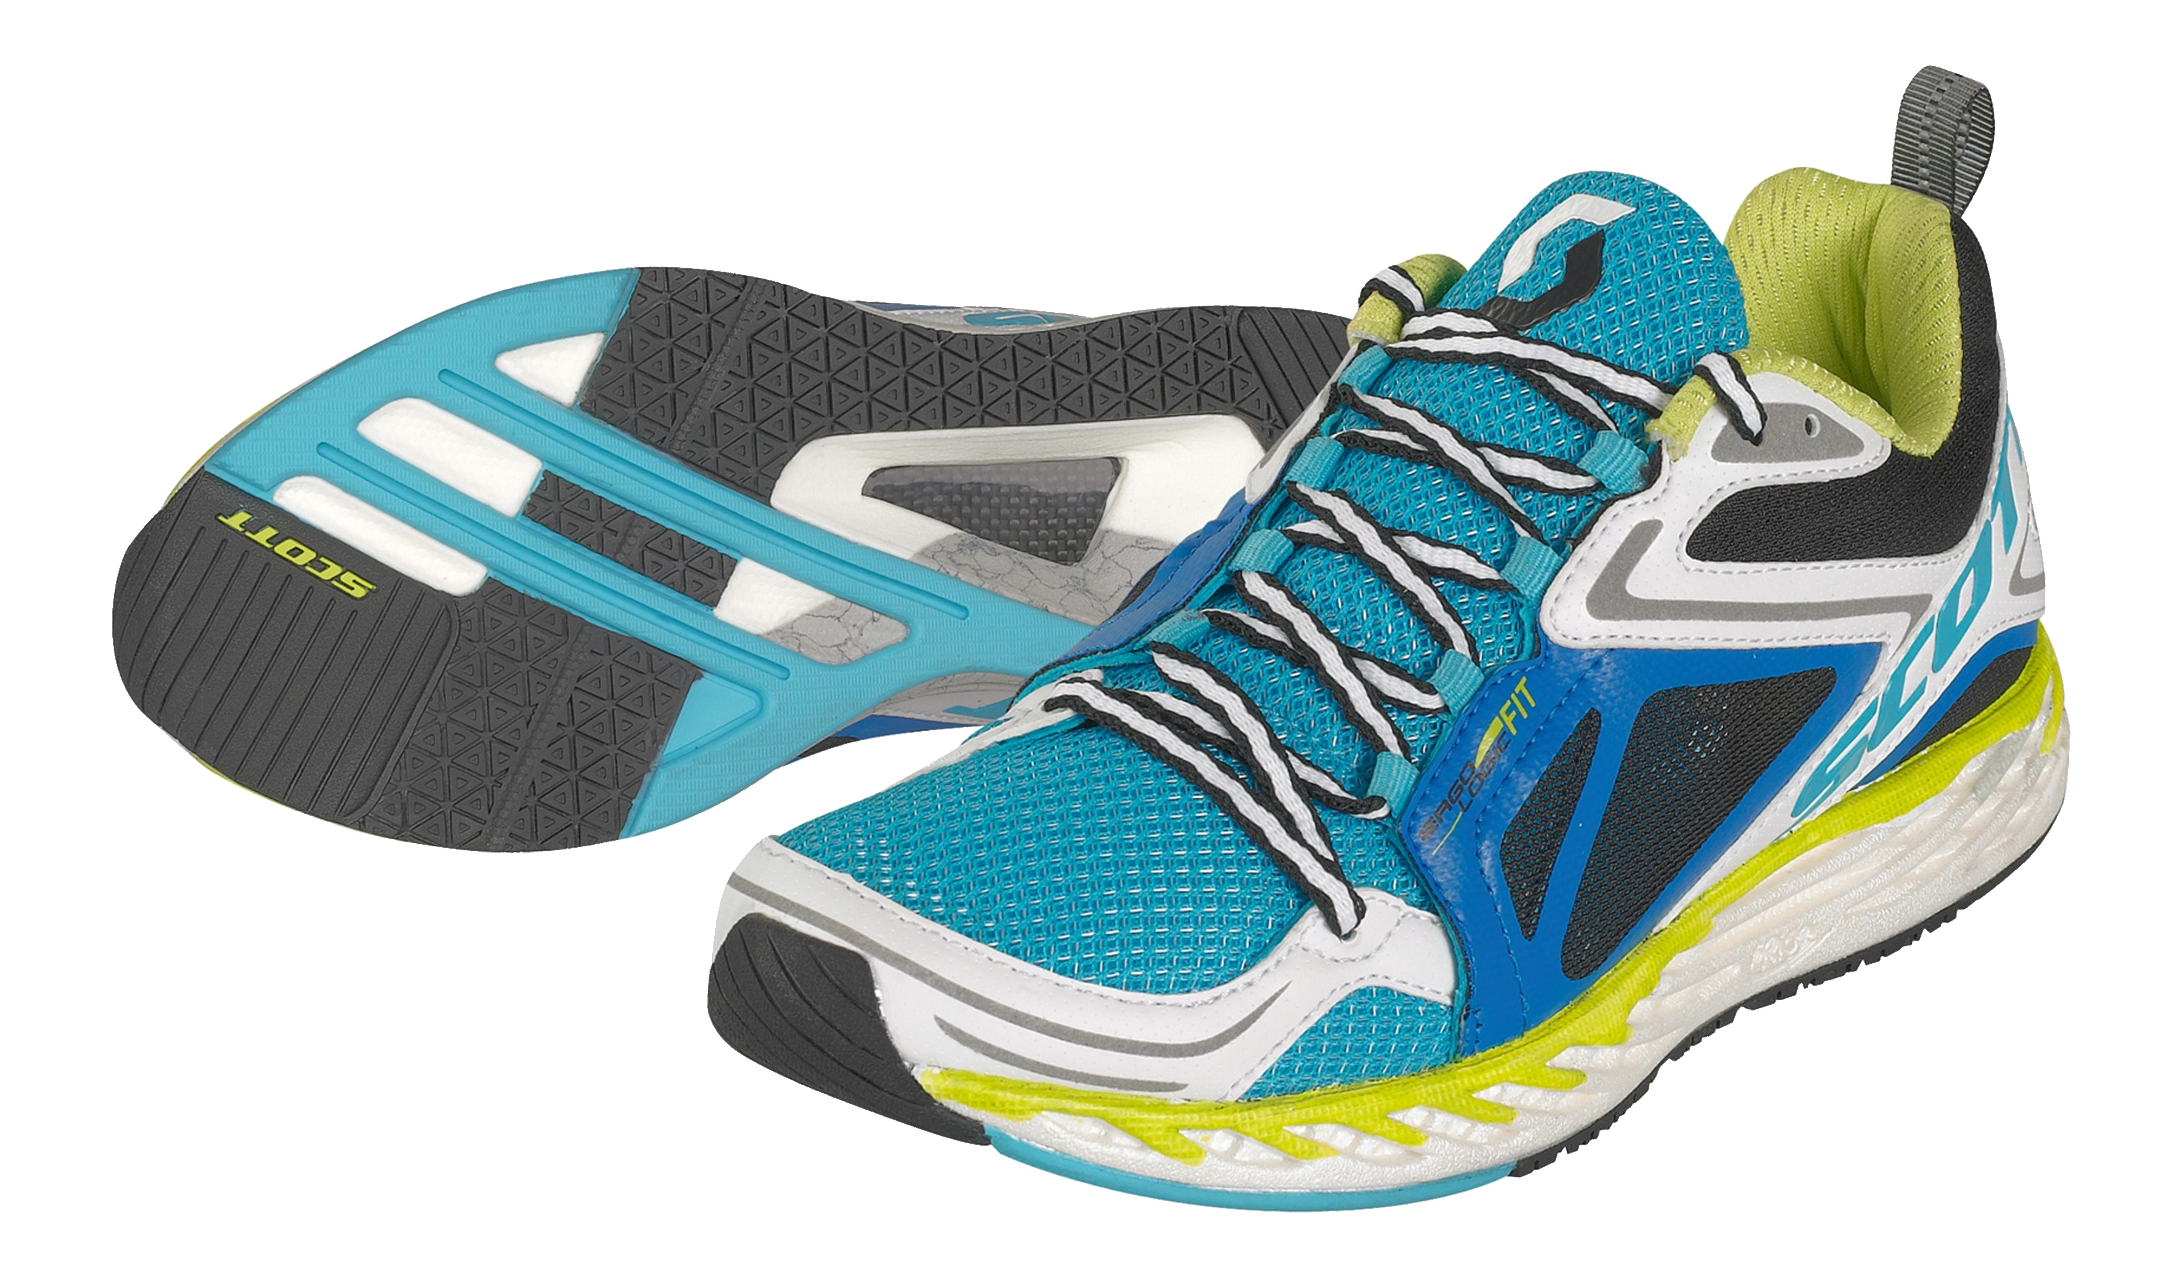 Running Shoes PNG High Definition Photo Image